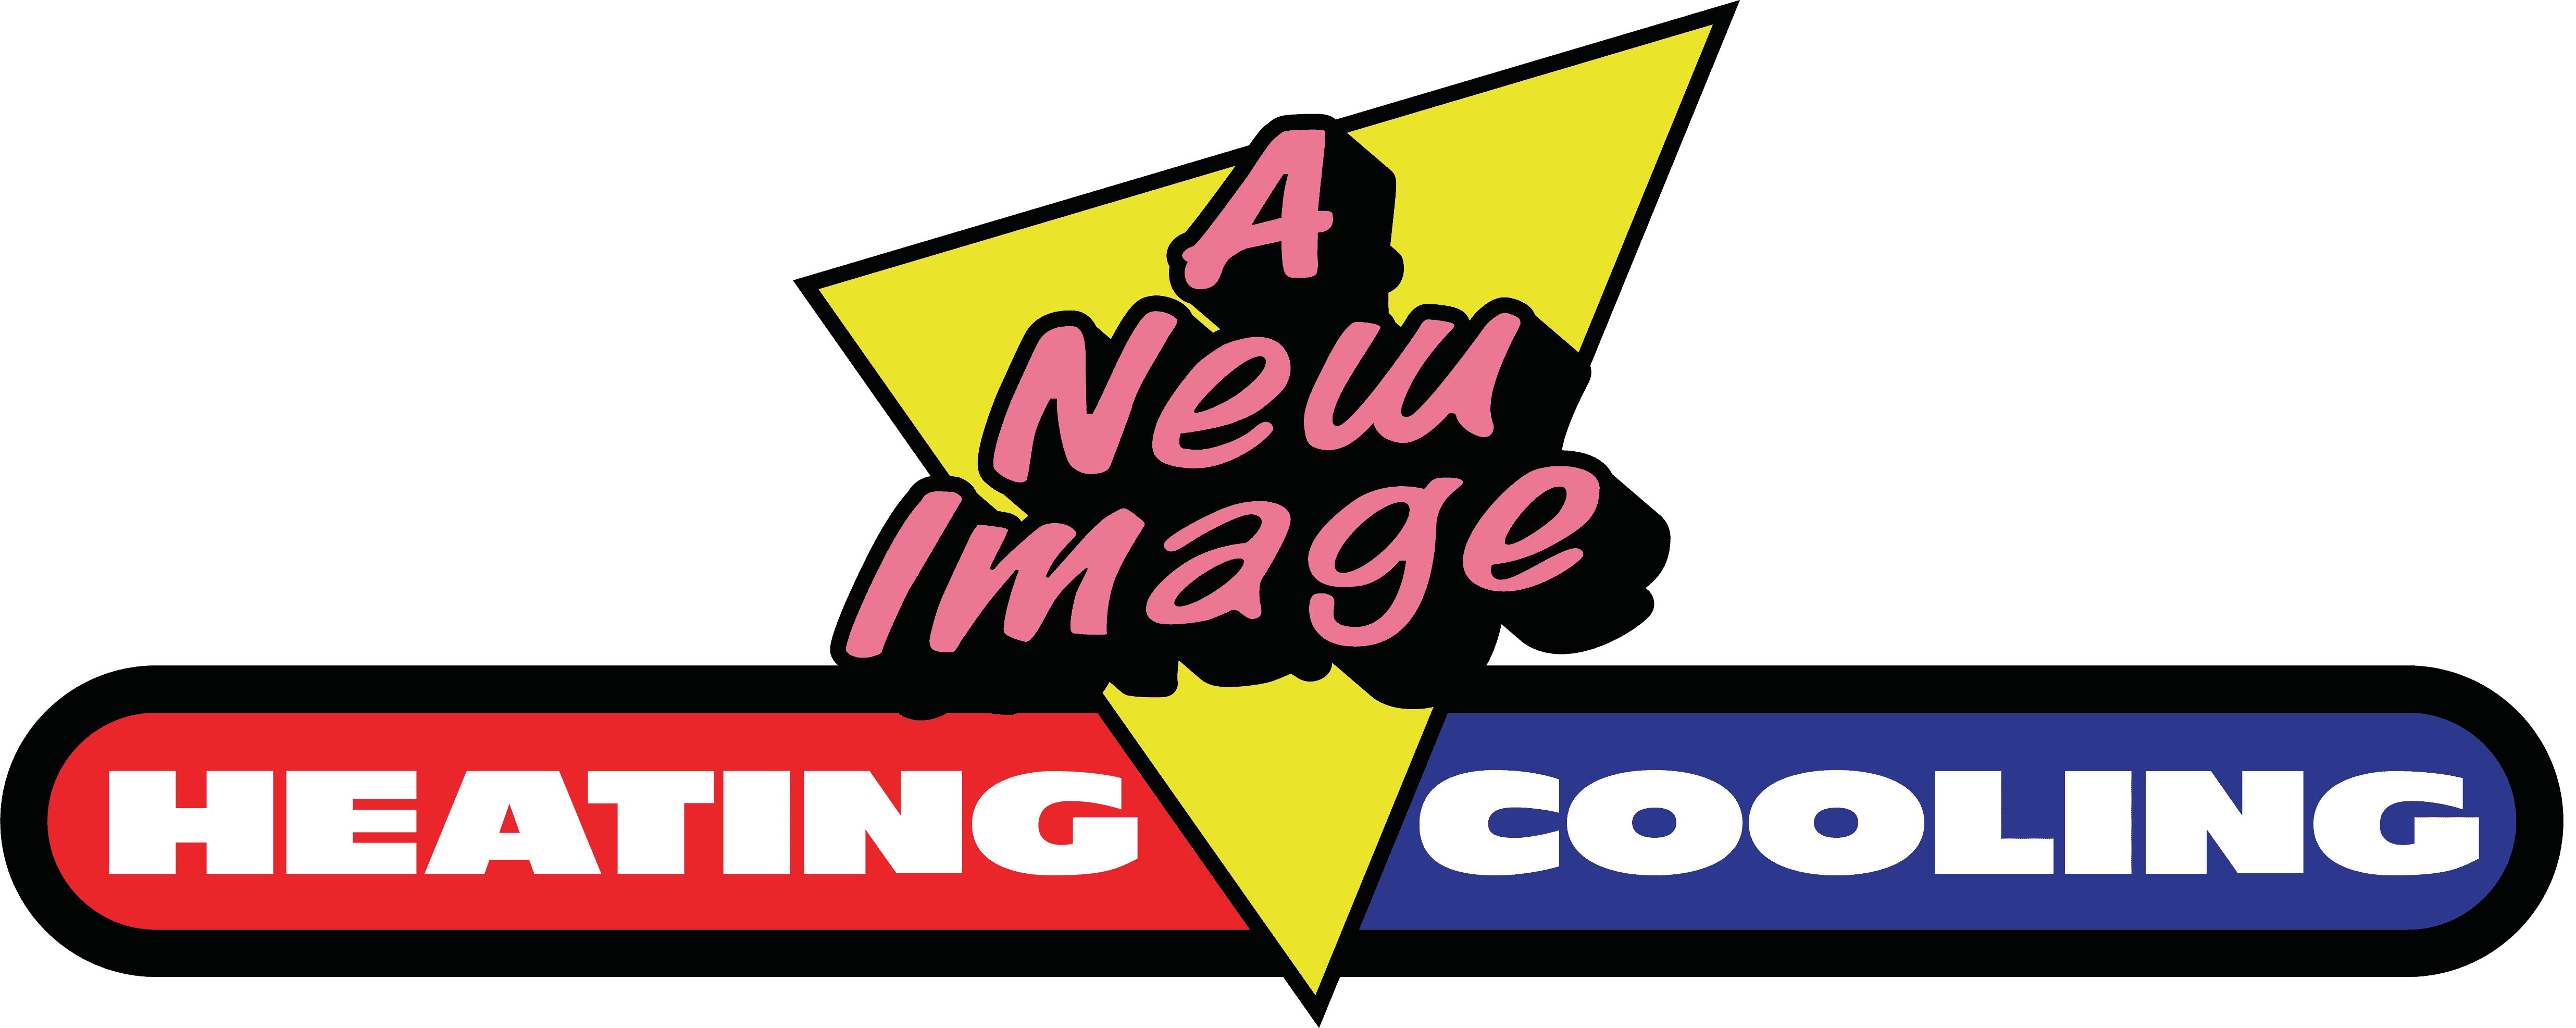 careers-a-new-image-heating-cooling-in-northeast-ohio